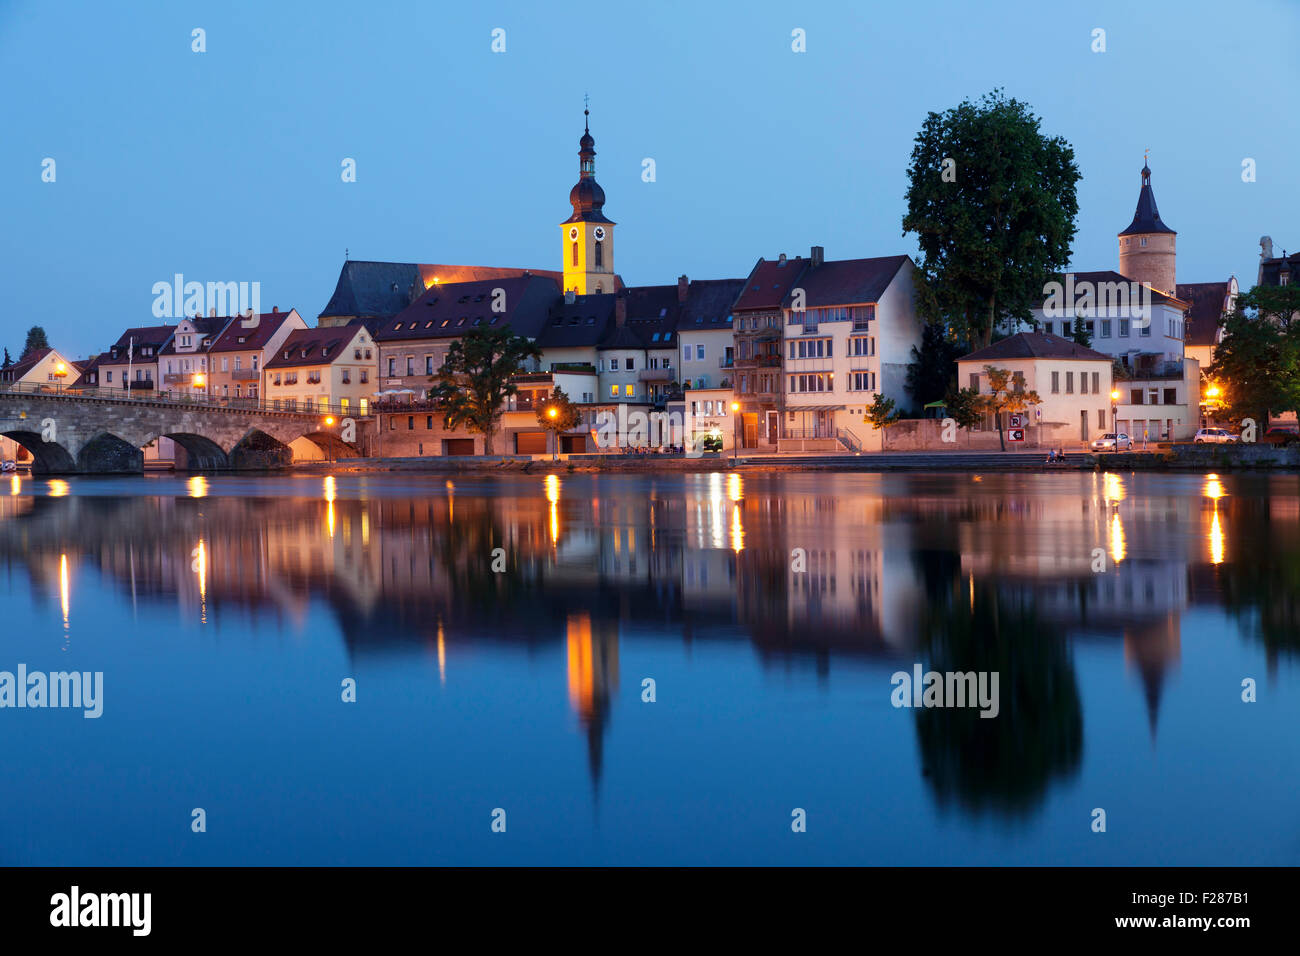 View over the river Main with the church of St. John and Falter Tower, Kitzingen, Lower Franconia, Franconia, Bavaria, Germany Stock Photo